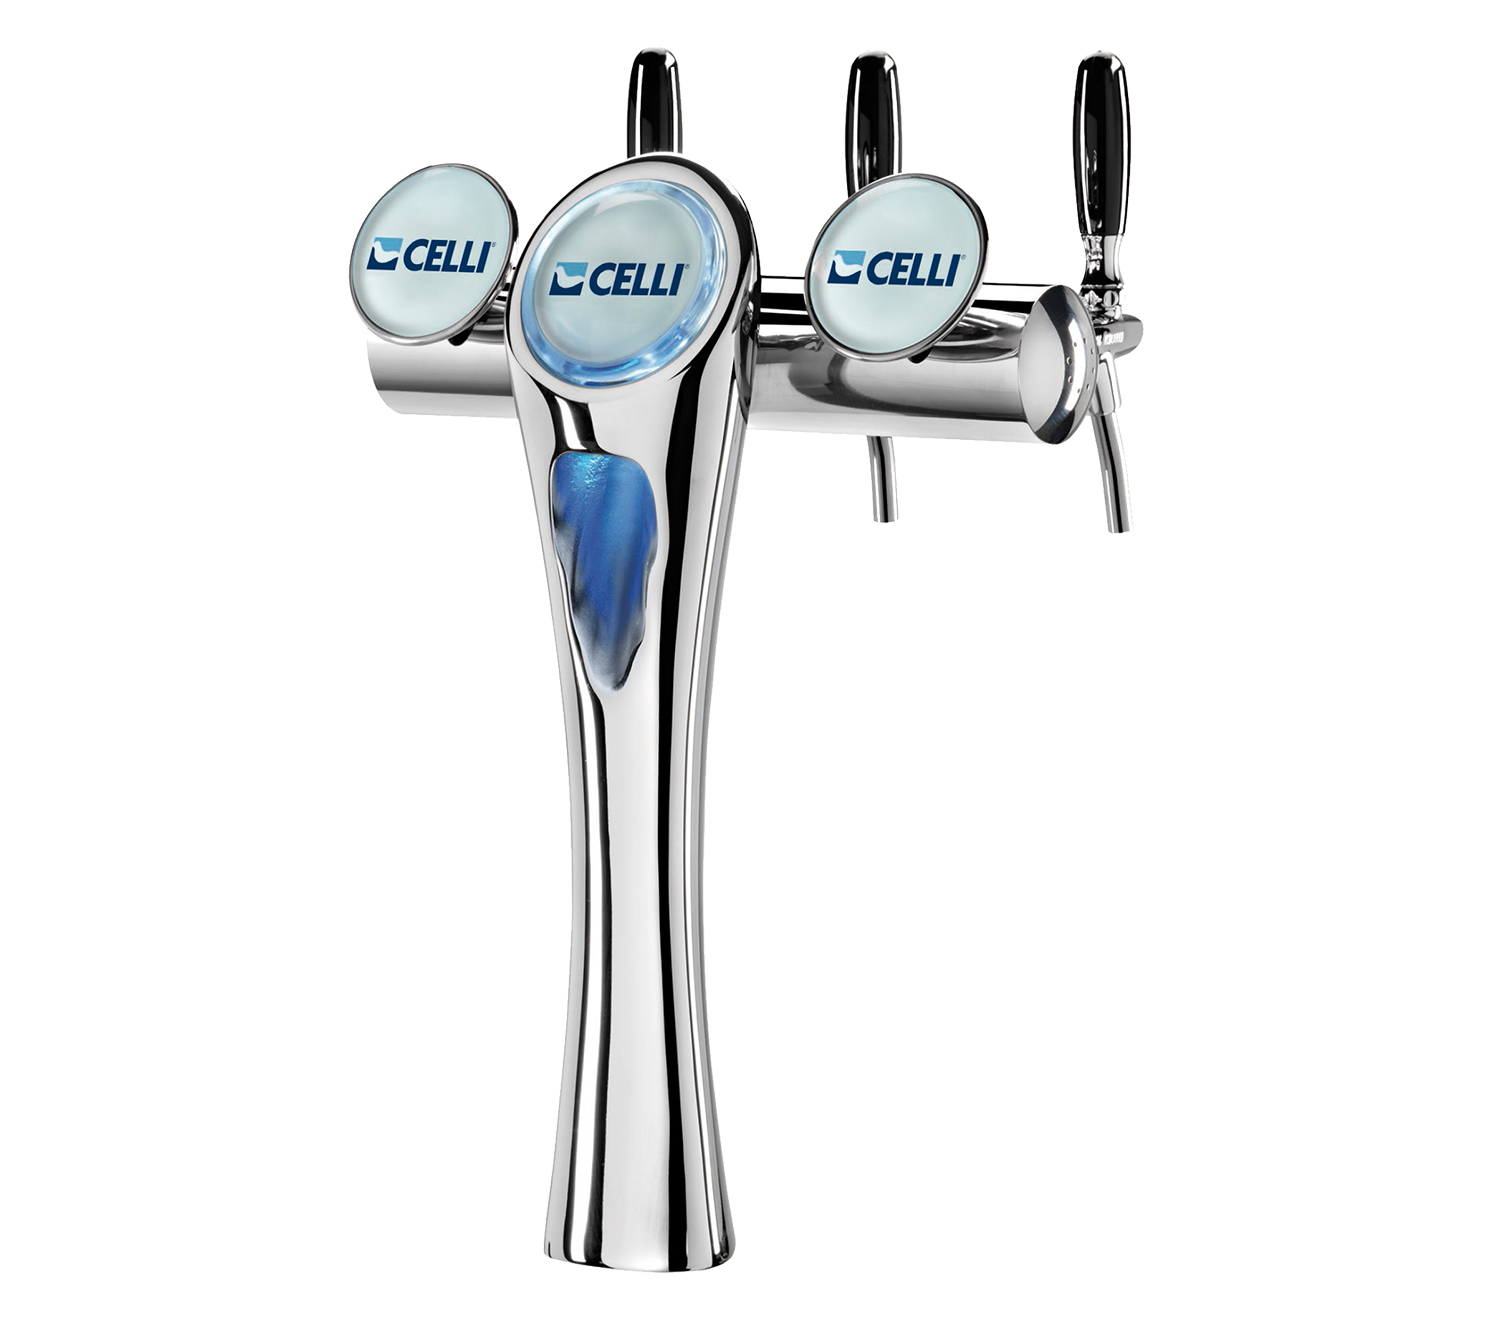 CELLI Eos T3 - Three way draft beer tower